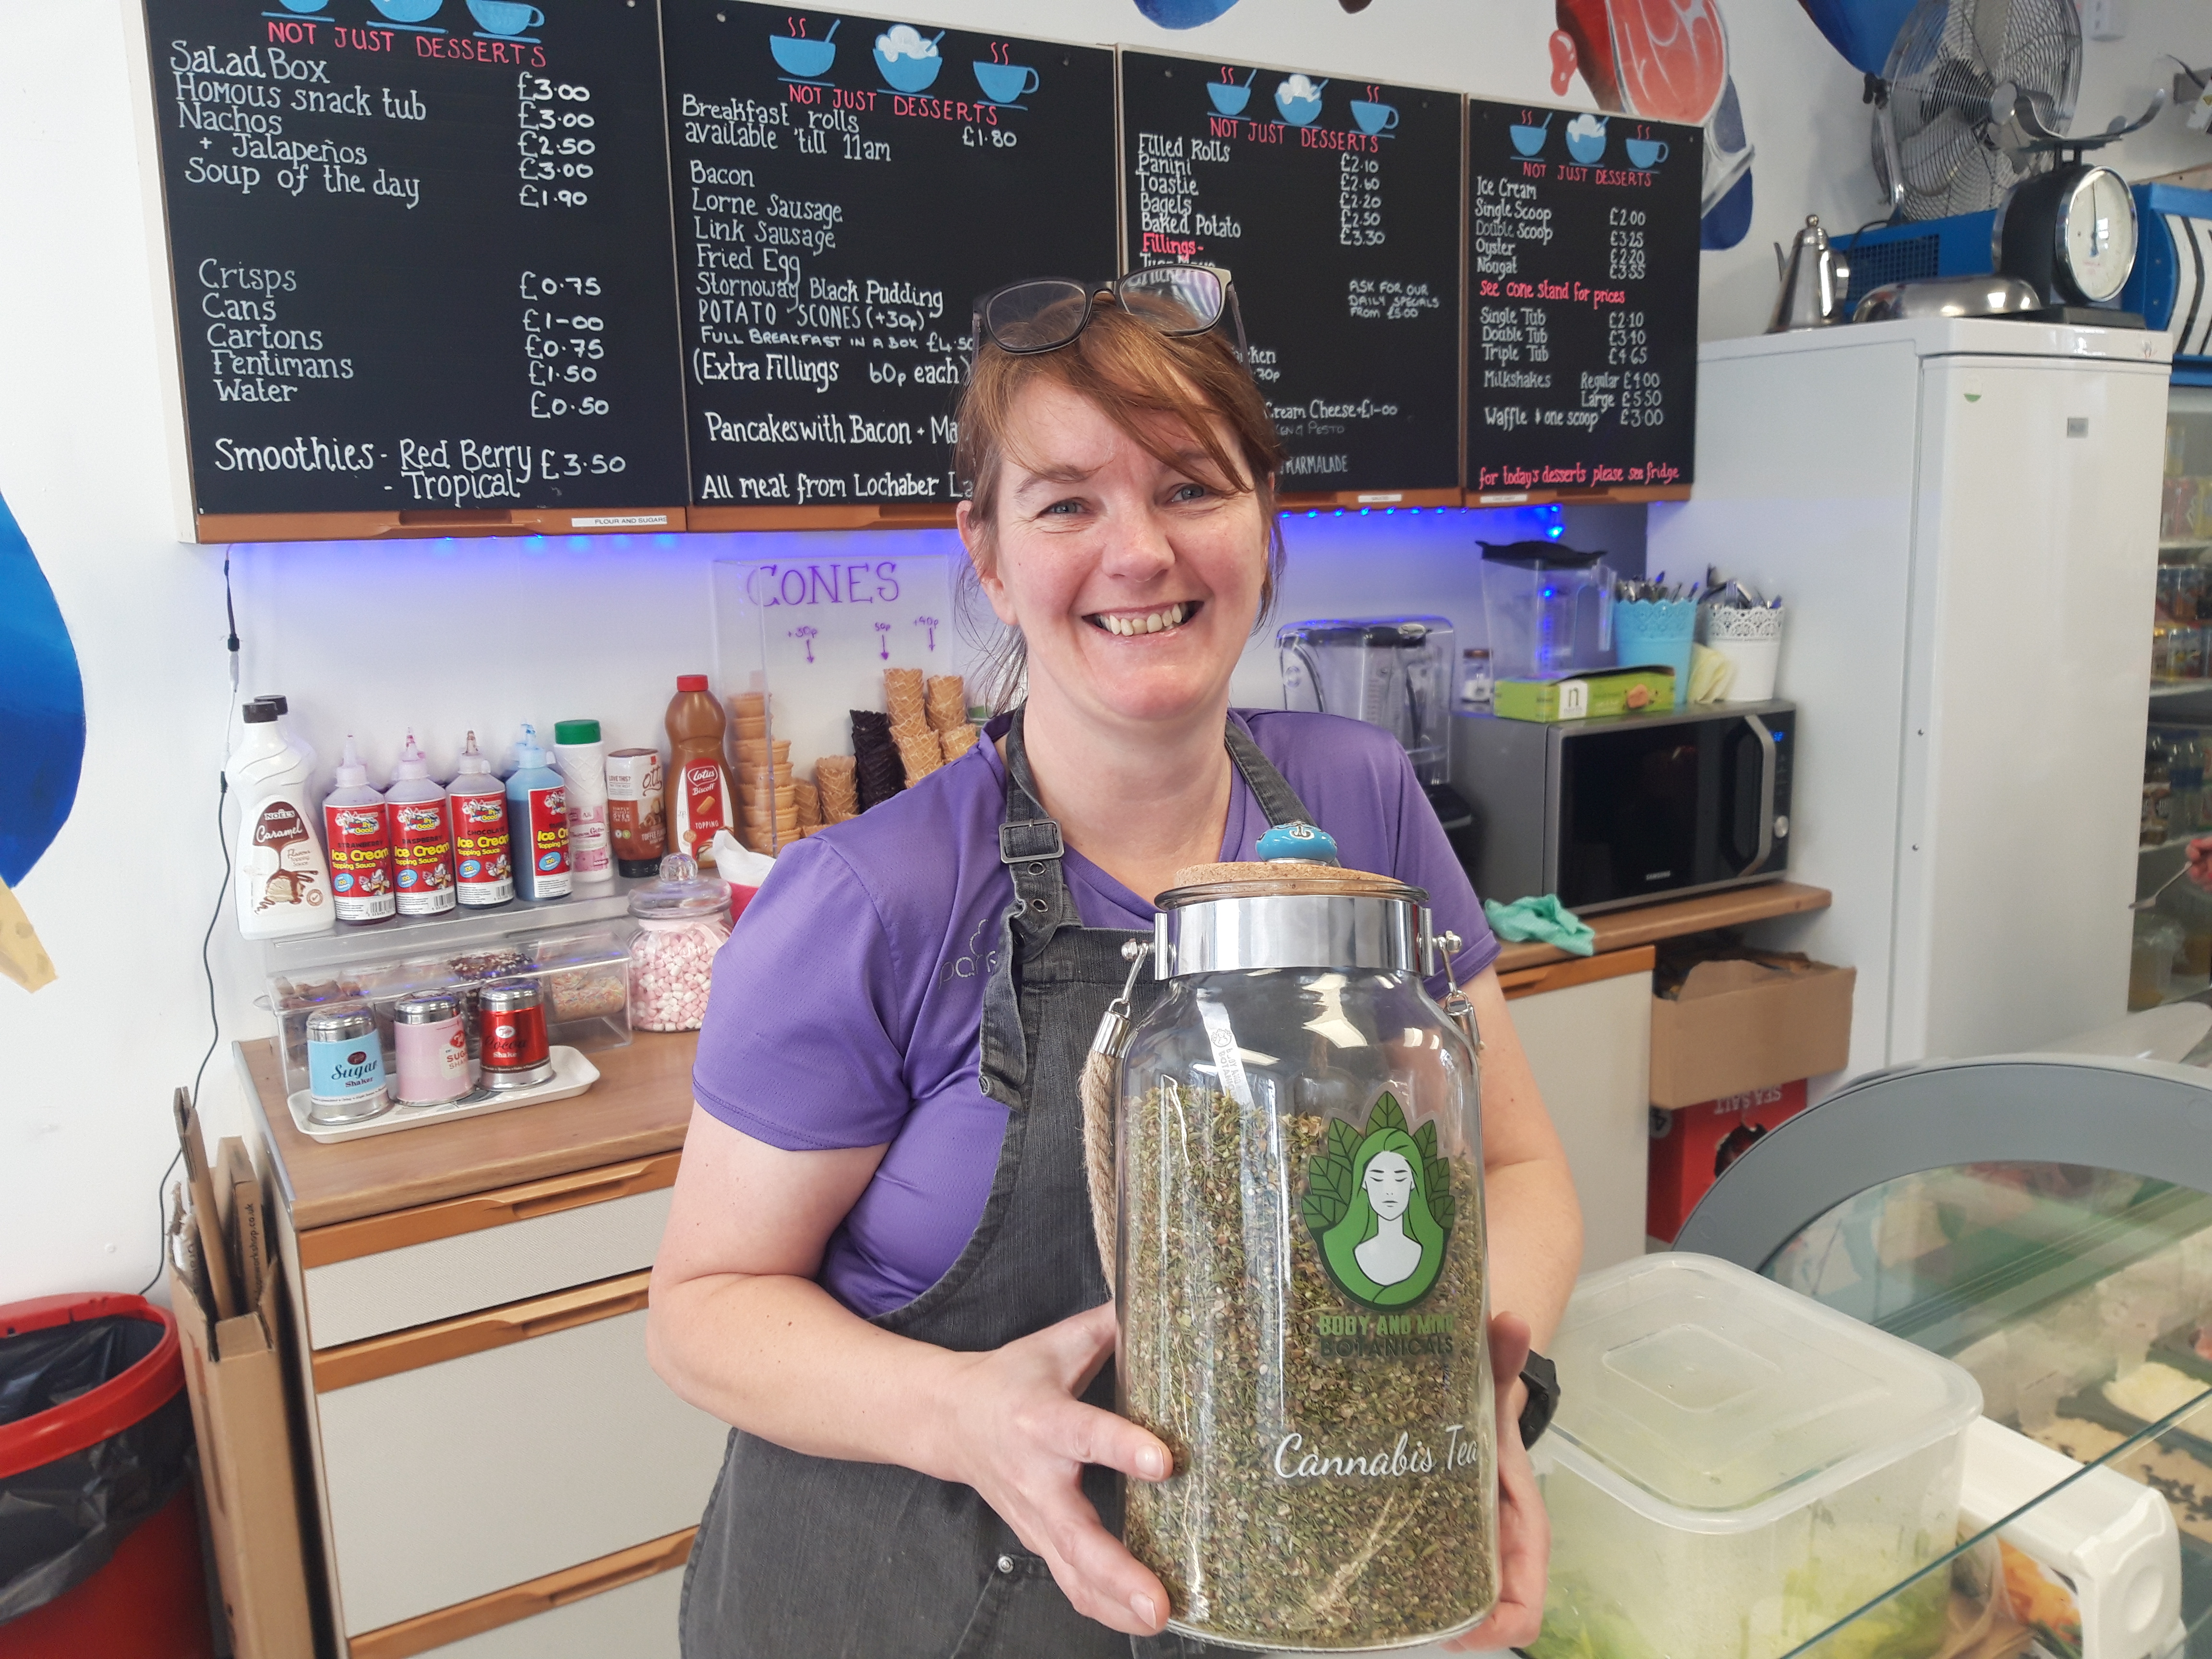 Helen Smith of Not Just Desserts who have started serving a cannabis tea with some interesting results.